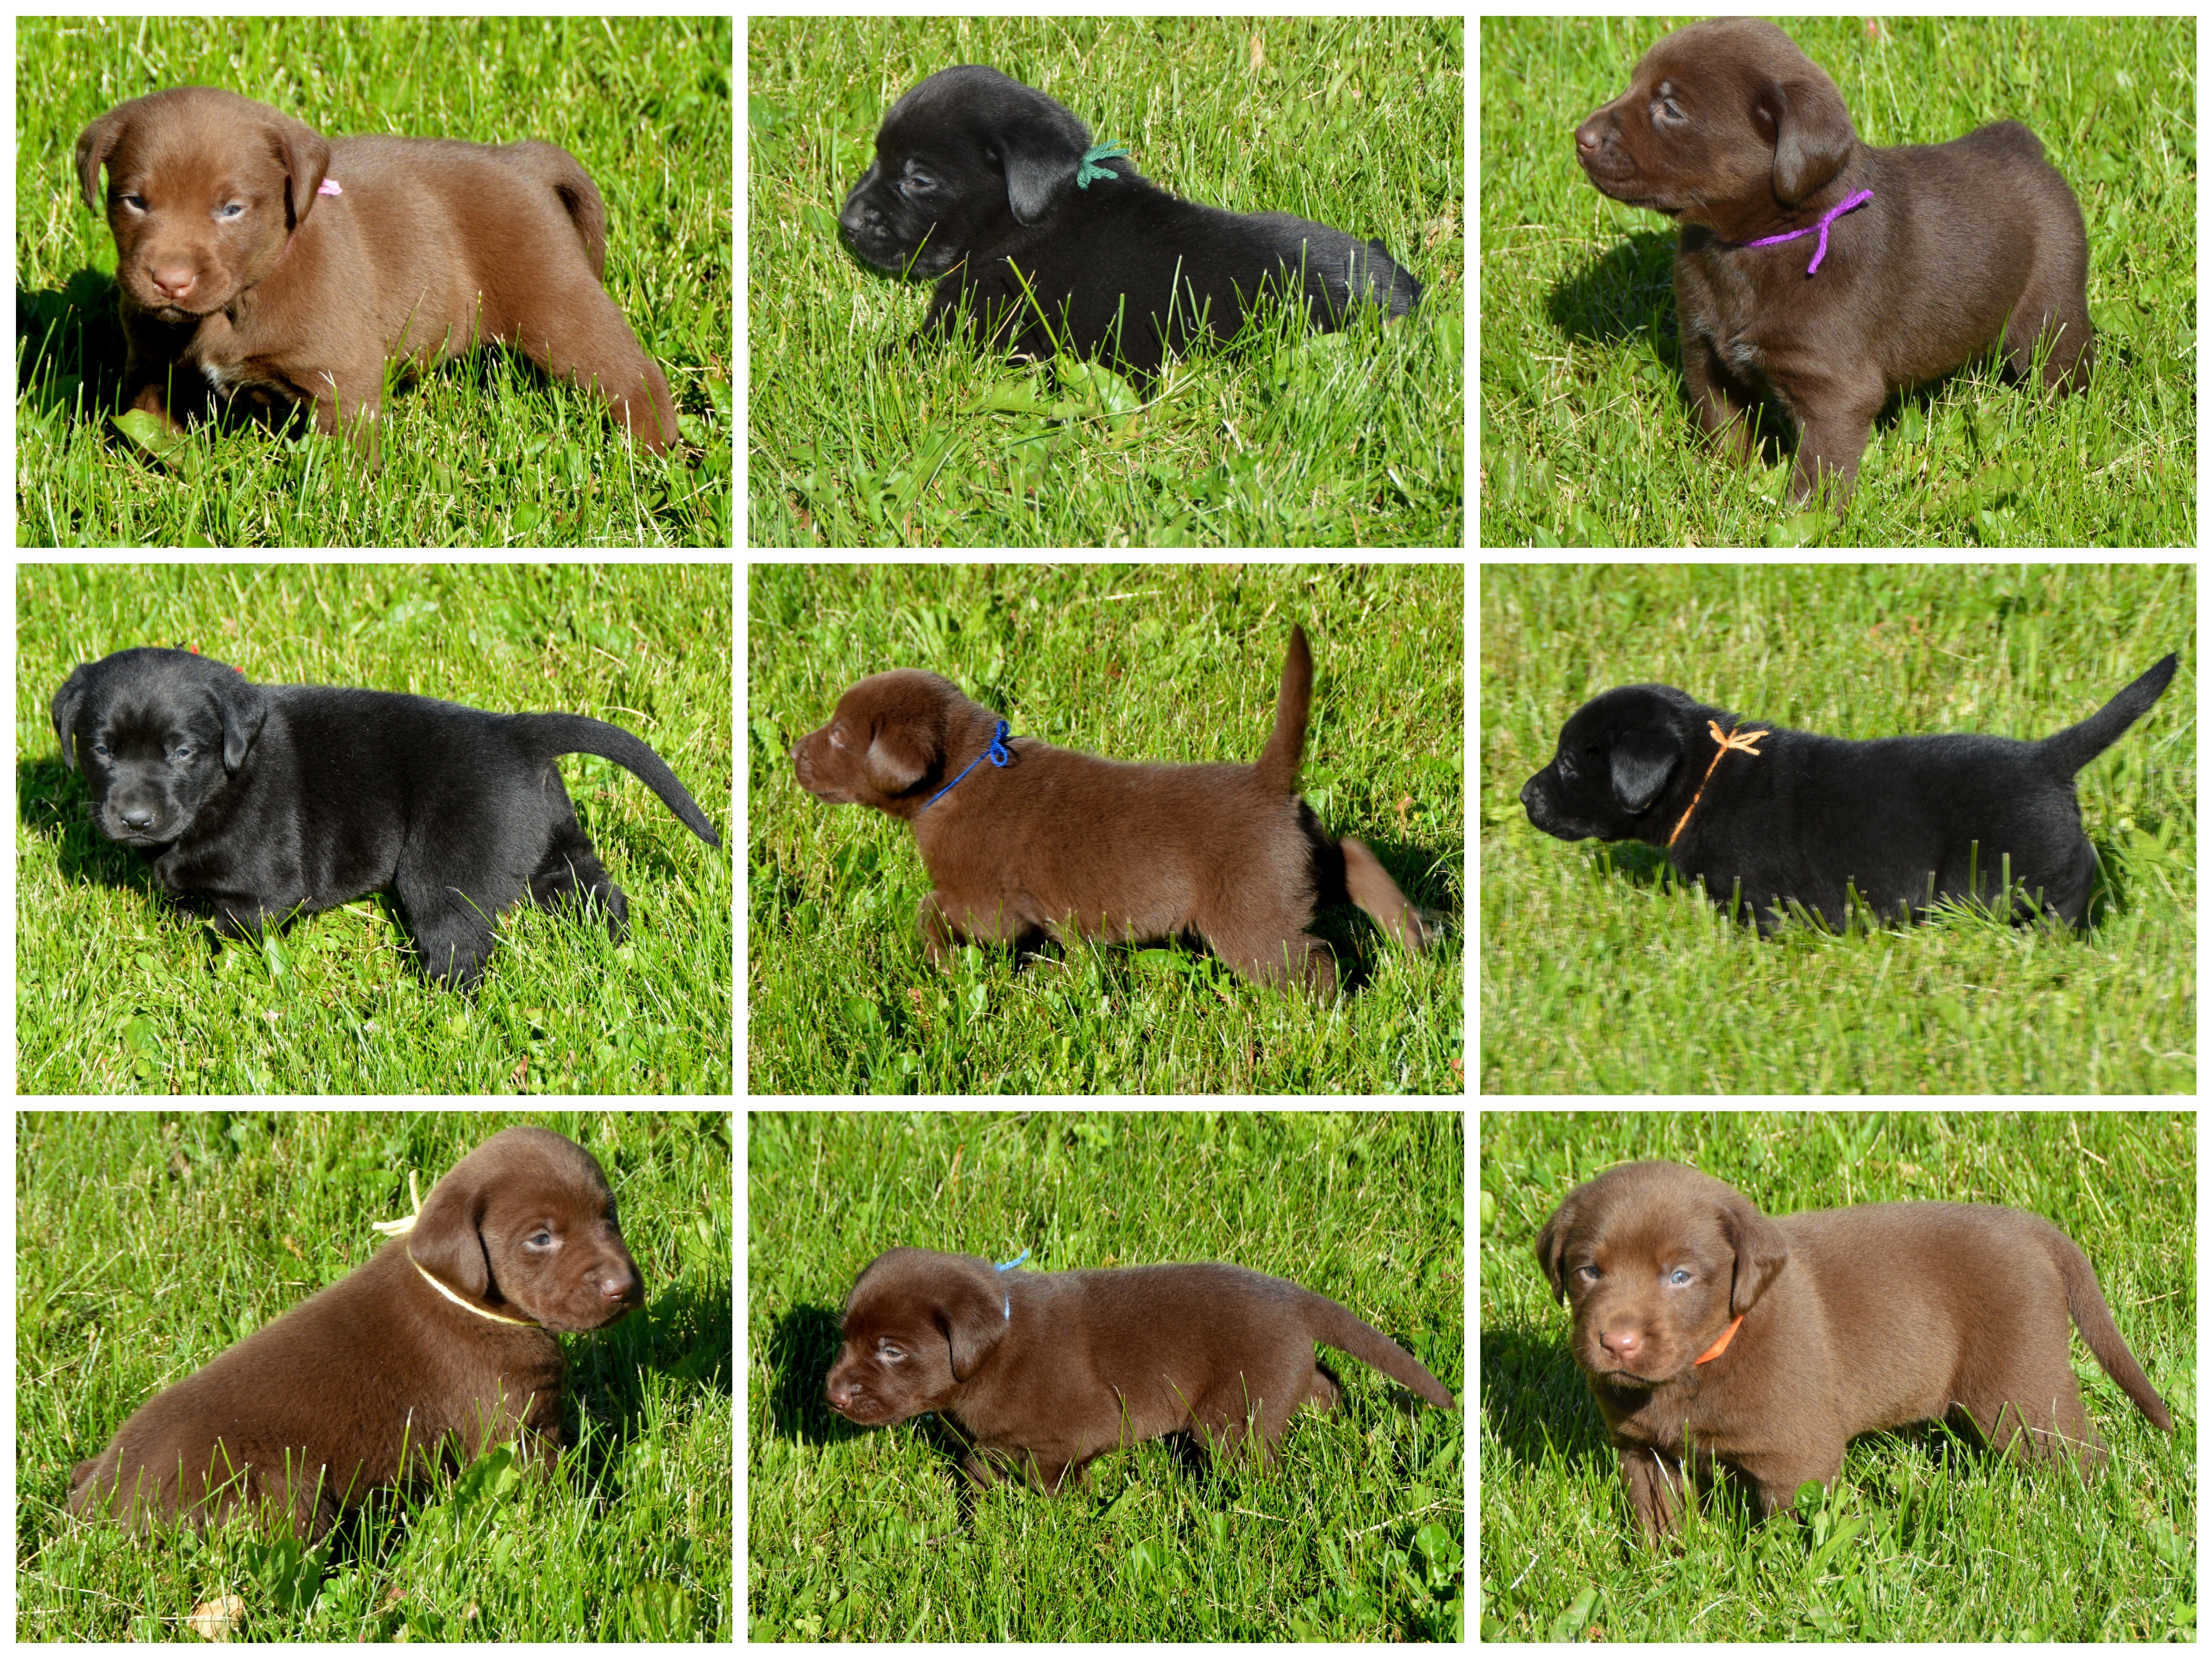 Kristy's '20 pups @4wks collage